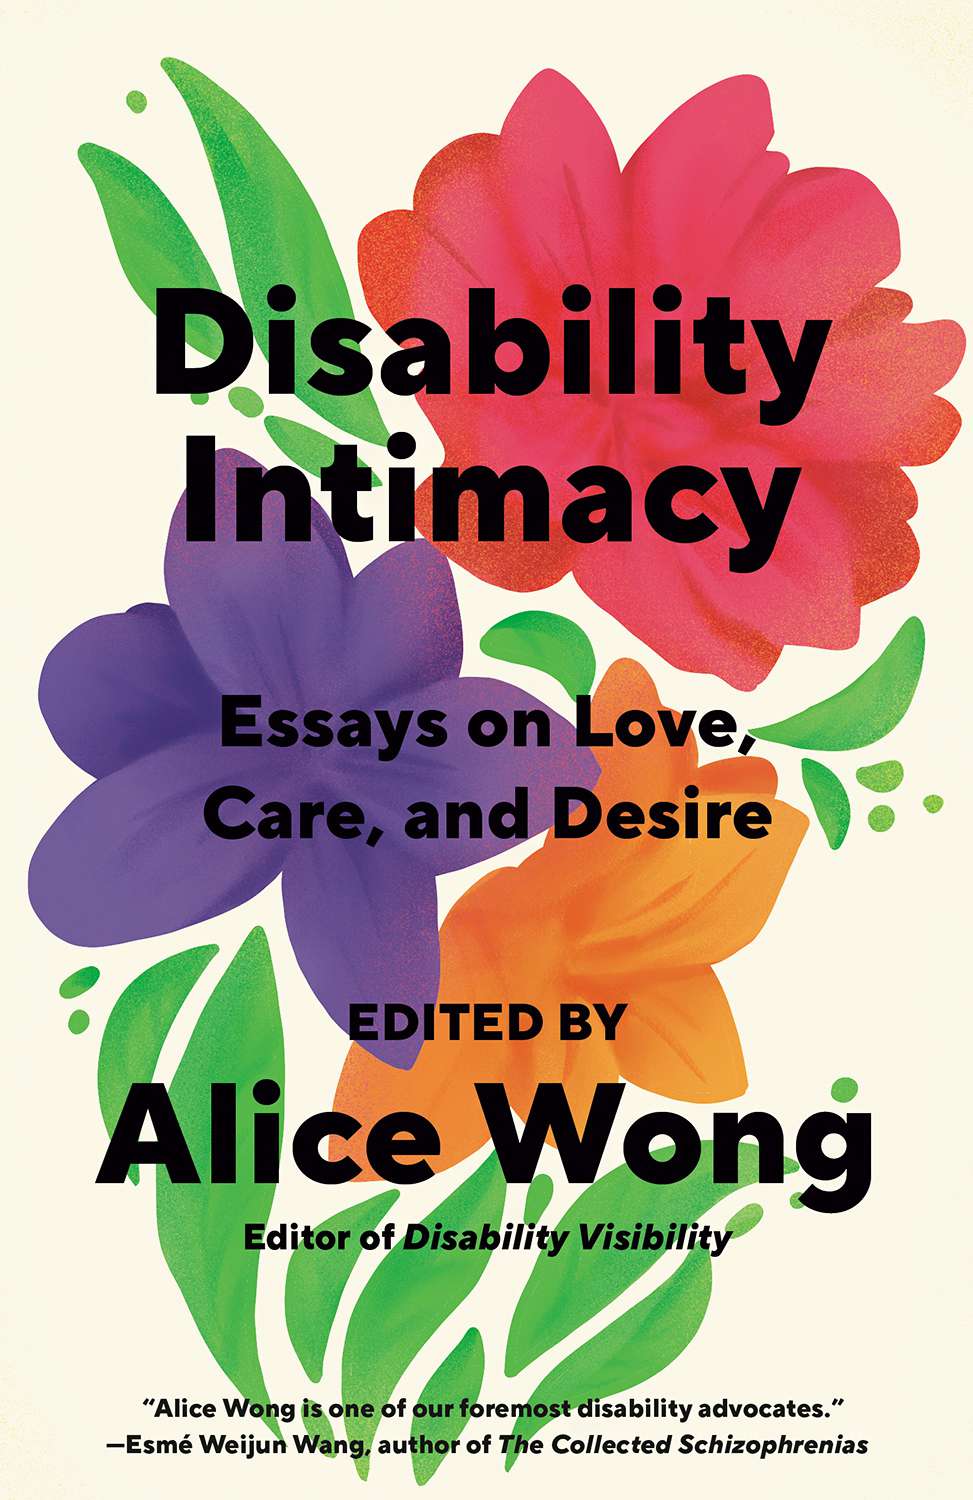 Disability Intimacy: Essays on Love, Care, and Desire edited by Alice Wong